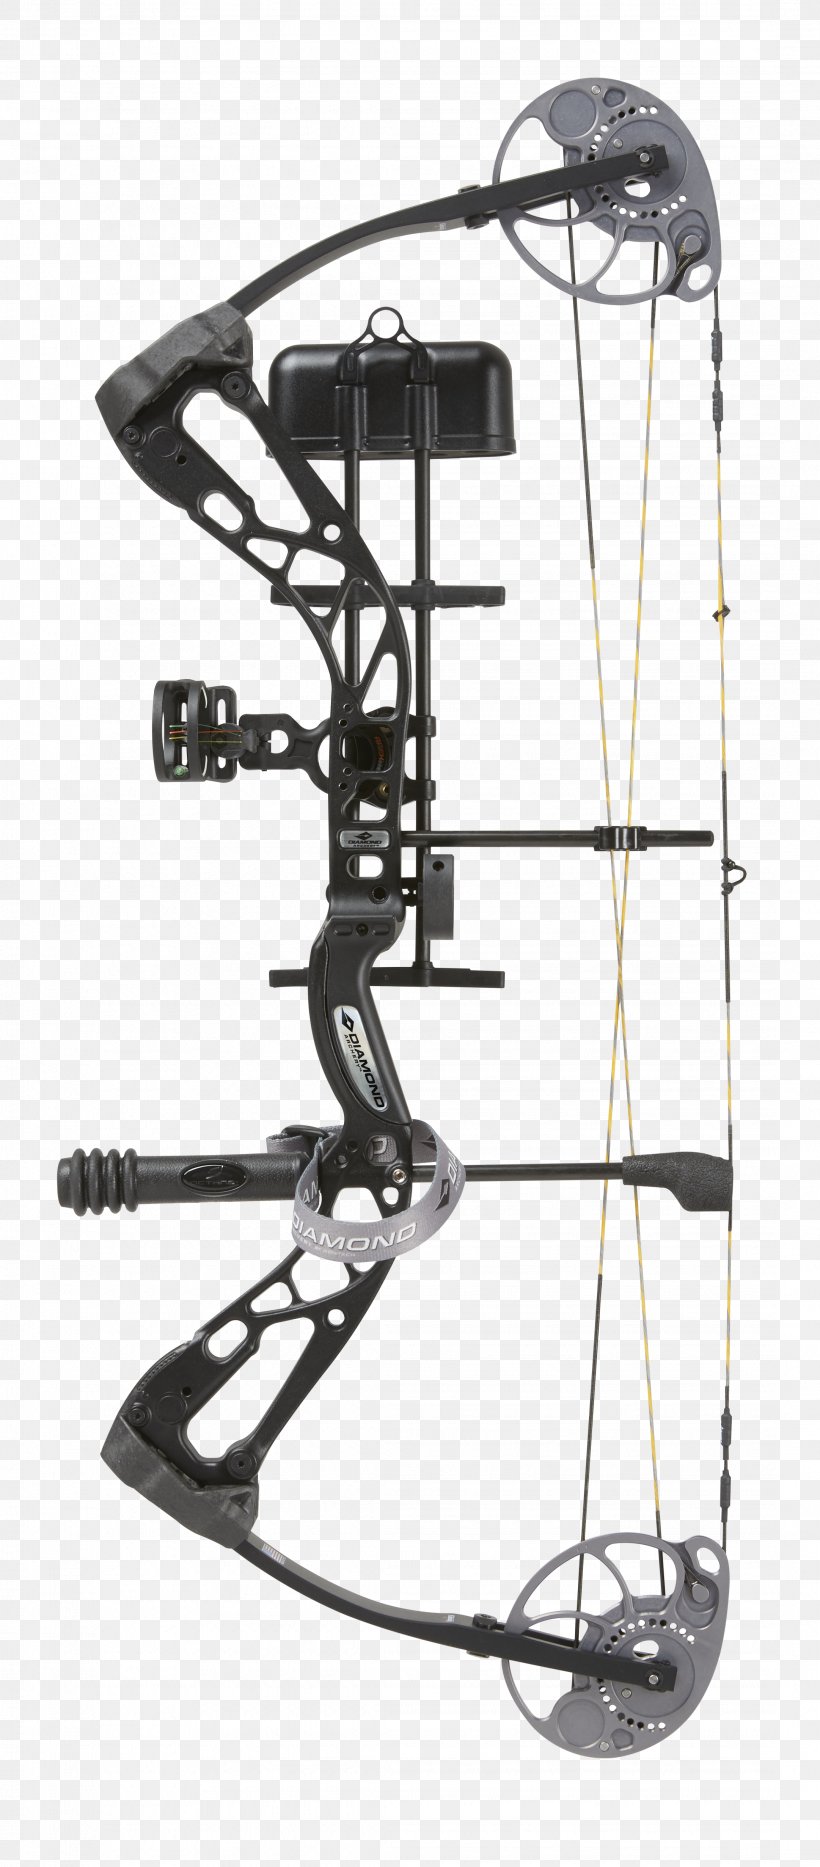 Compound Bows Archery Bow And Arrow Binary Cam Diamond, PNG, 2162x4923px, Compound Bows, Archery, Binary Cam, Bow And Arrow, Bowfishing Download Free